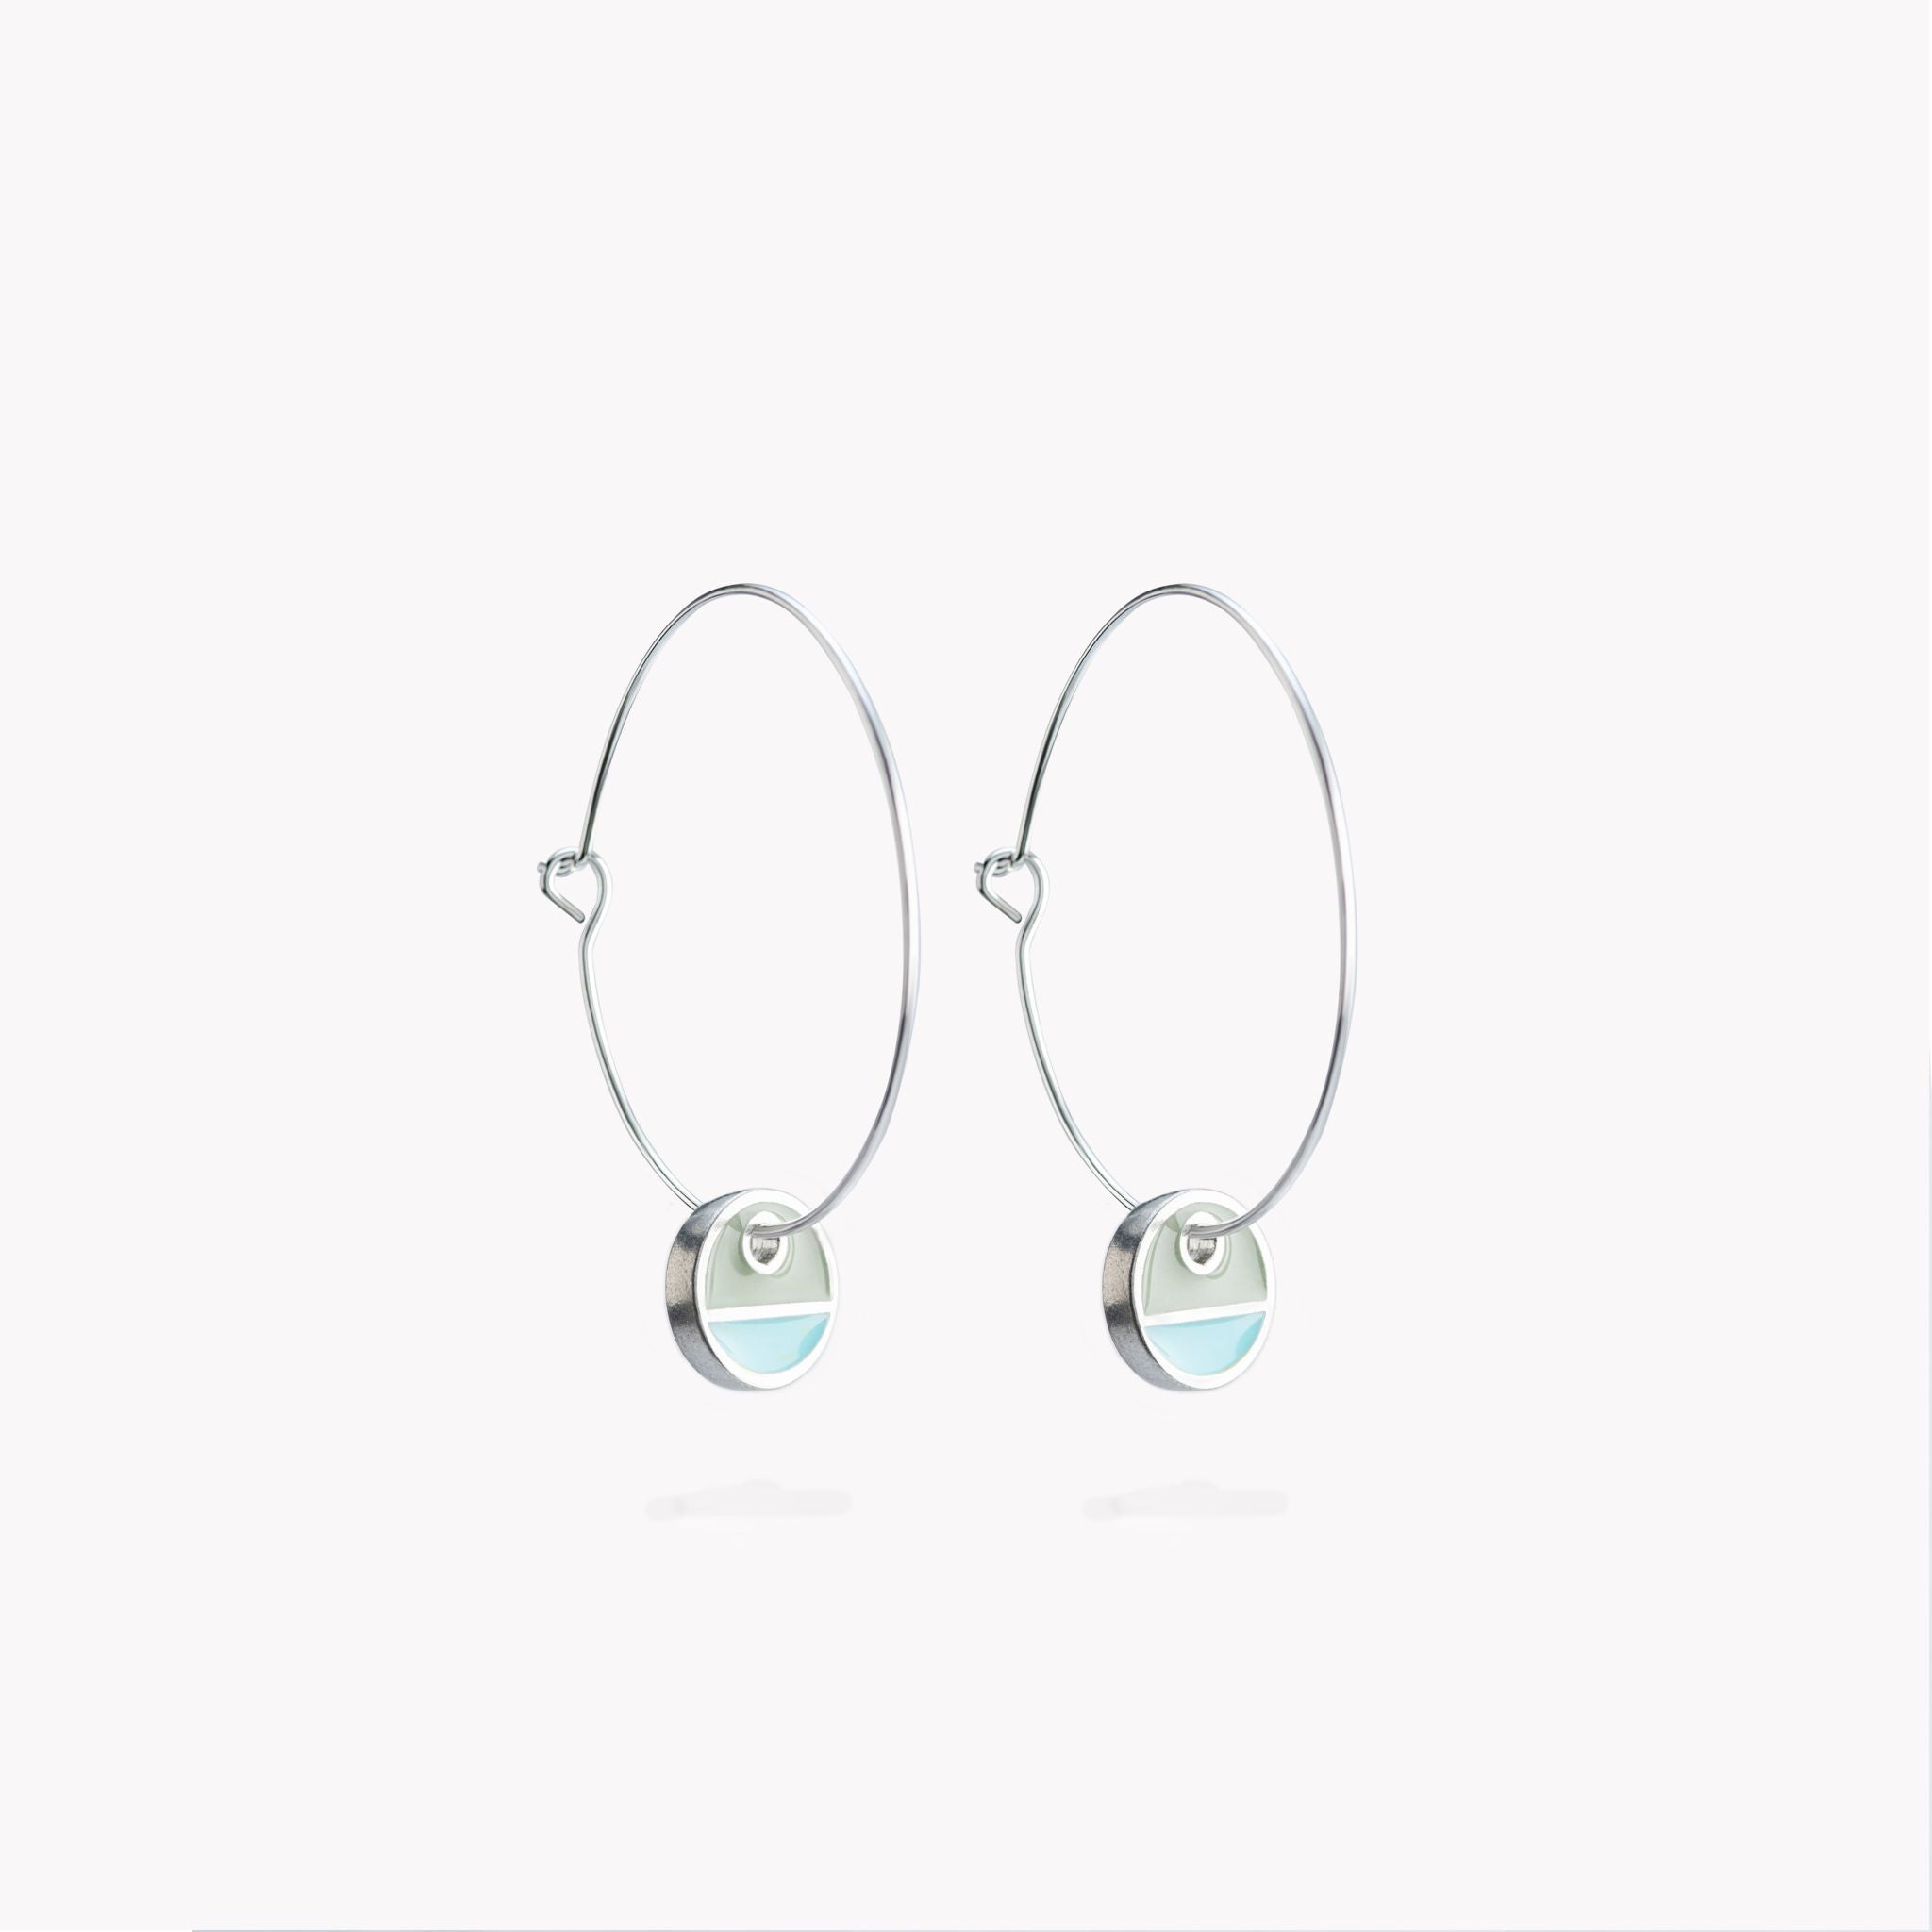 A simple pair of hoop earrings with turquoise and grey circular hanging discs.